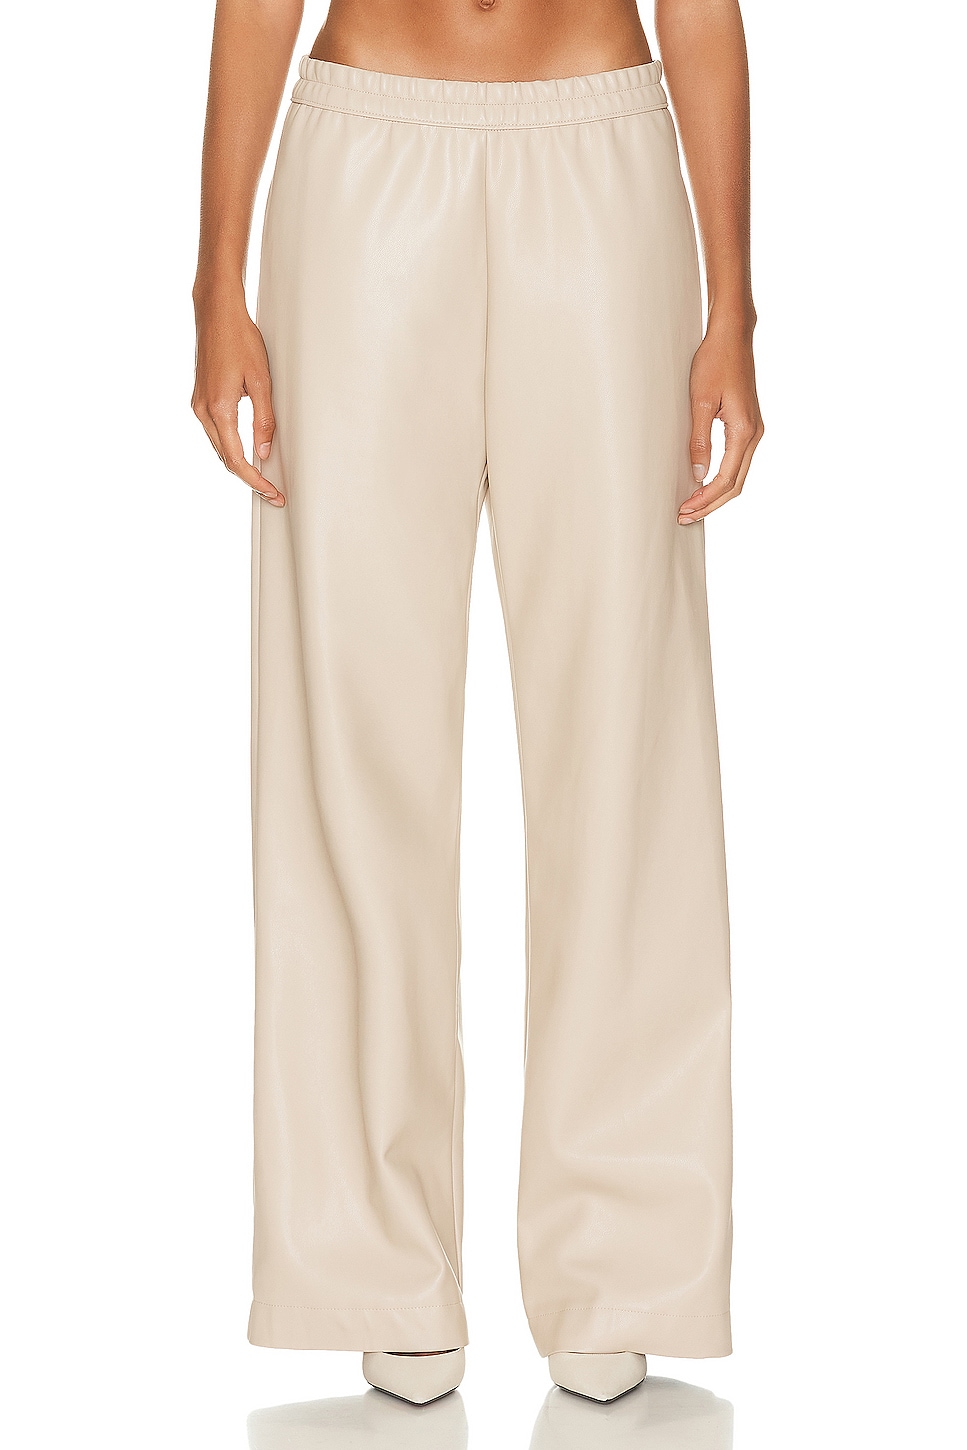 Image 1 of Enza Costa Soft Leather Straight Leg Pant in Khaki